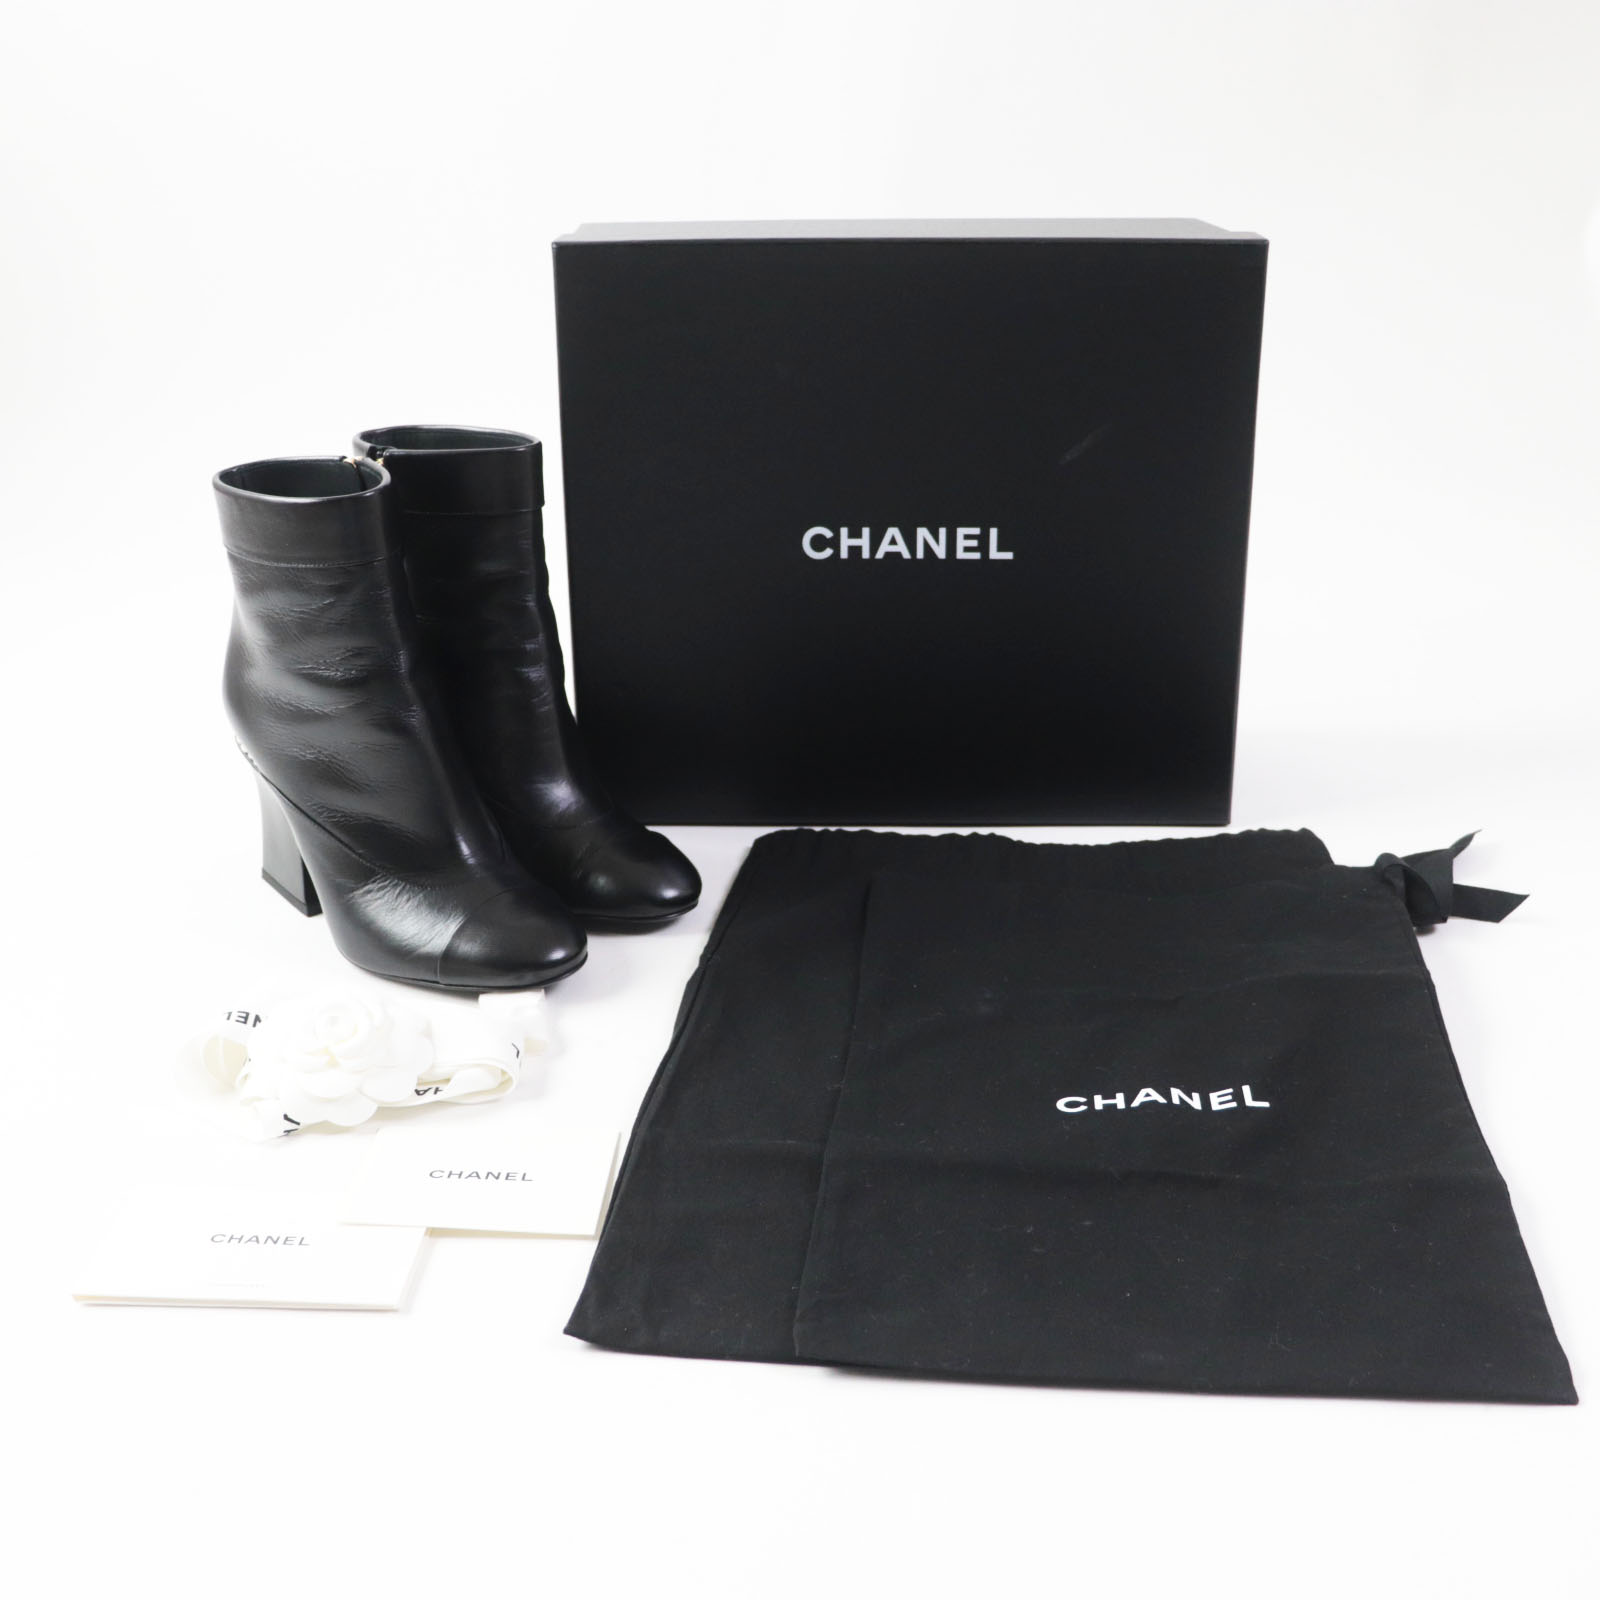  ultimate beautiful goods * Chanel 22A G39262go-tos gold here Mark *F pearl attaching ankle boots black Gold 36.5 box * storage bag attaching lady's 